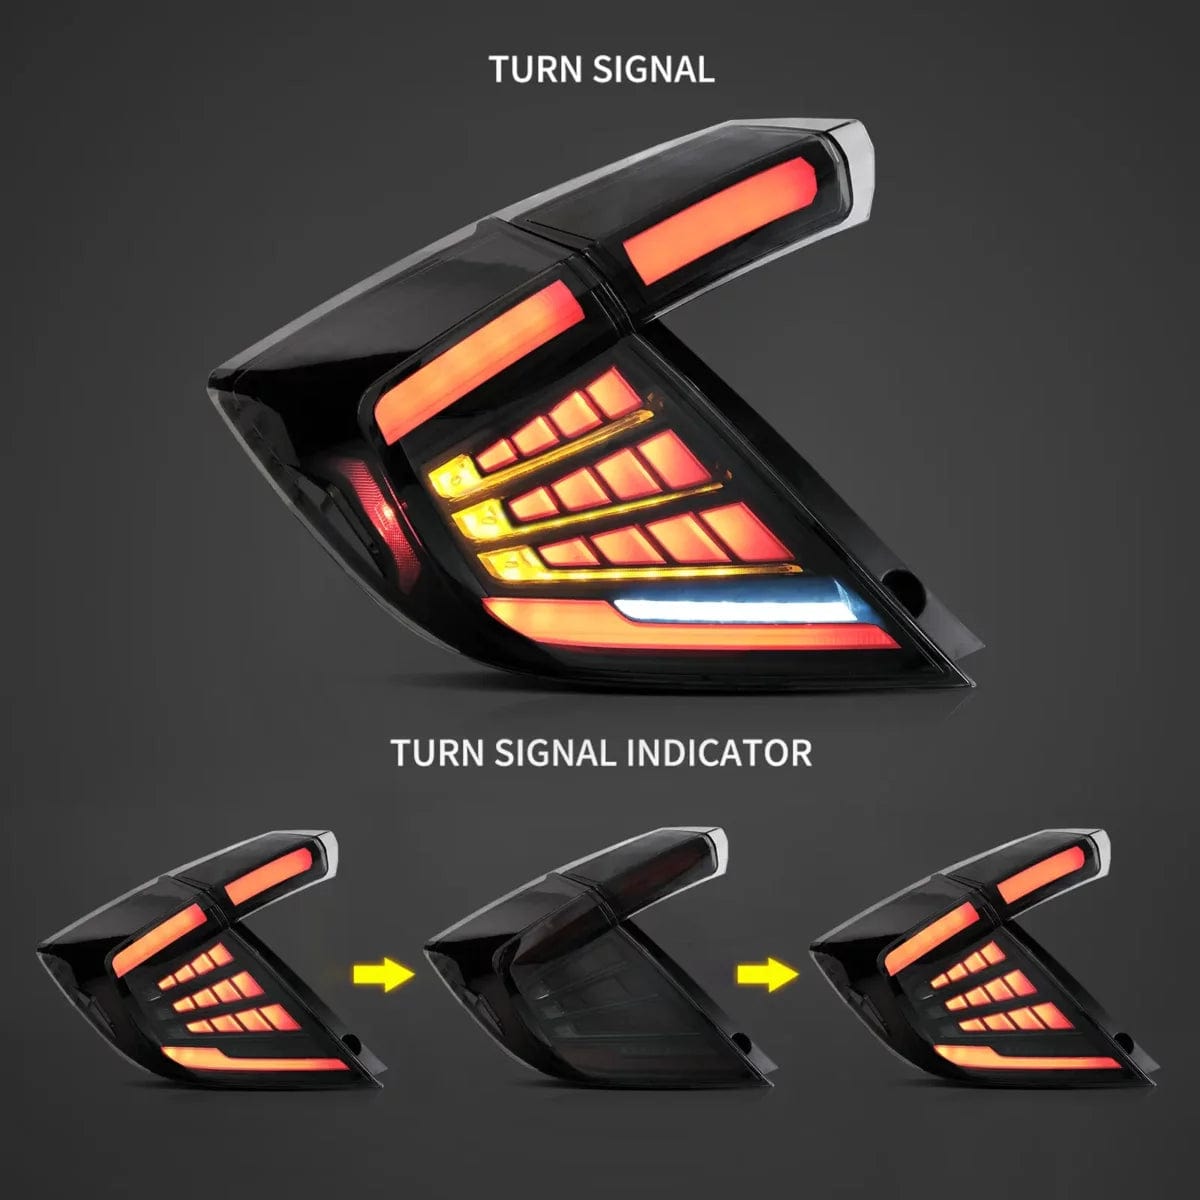 16-21 Honda Civic Hatchback Tail Lights with Dynamic Welcome Lighting - RGB Halo Kits Multicolor Flow Series Color Chasing RGBWA LED headlight kit Oracle Lighting Trendz OneUpLighting Morimoto theretrofitsource AutoLEDTech Diode Dynamics